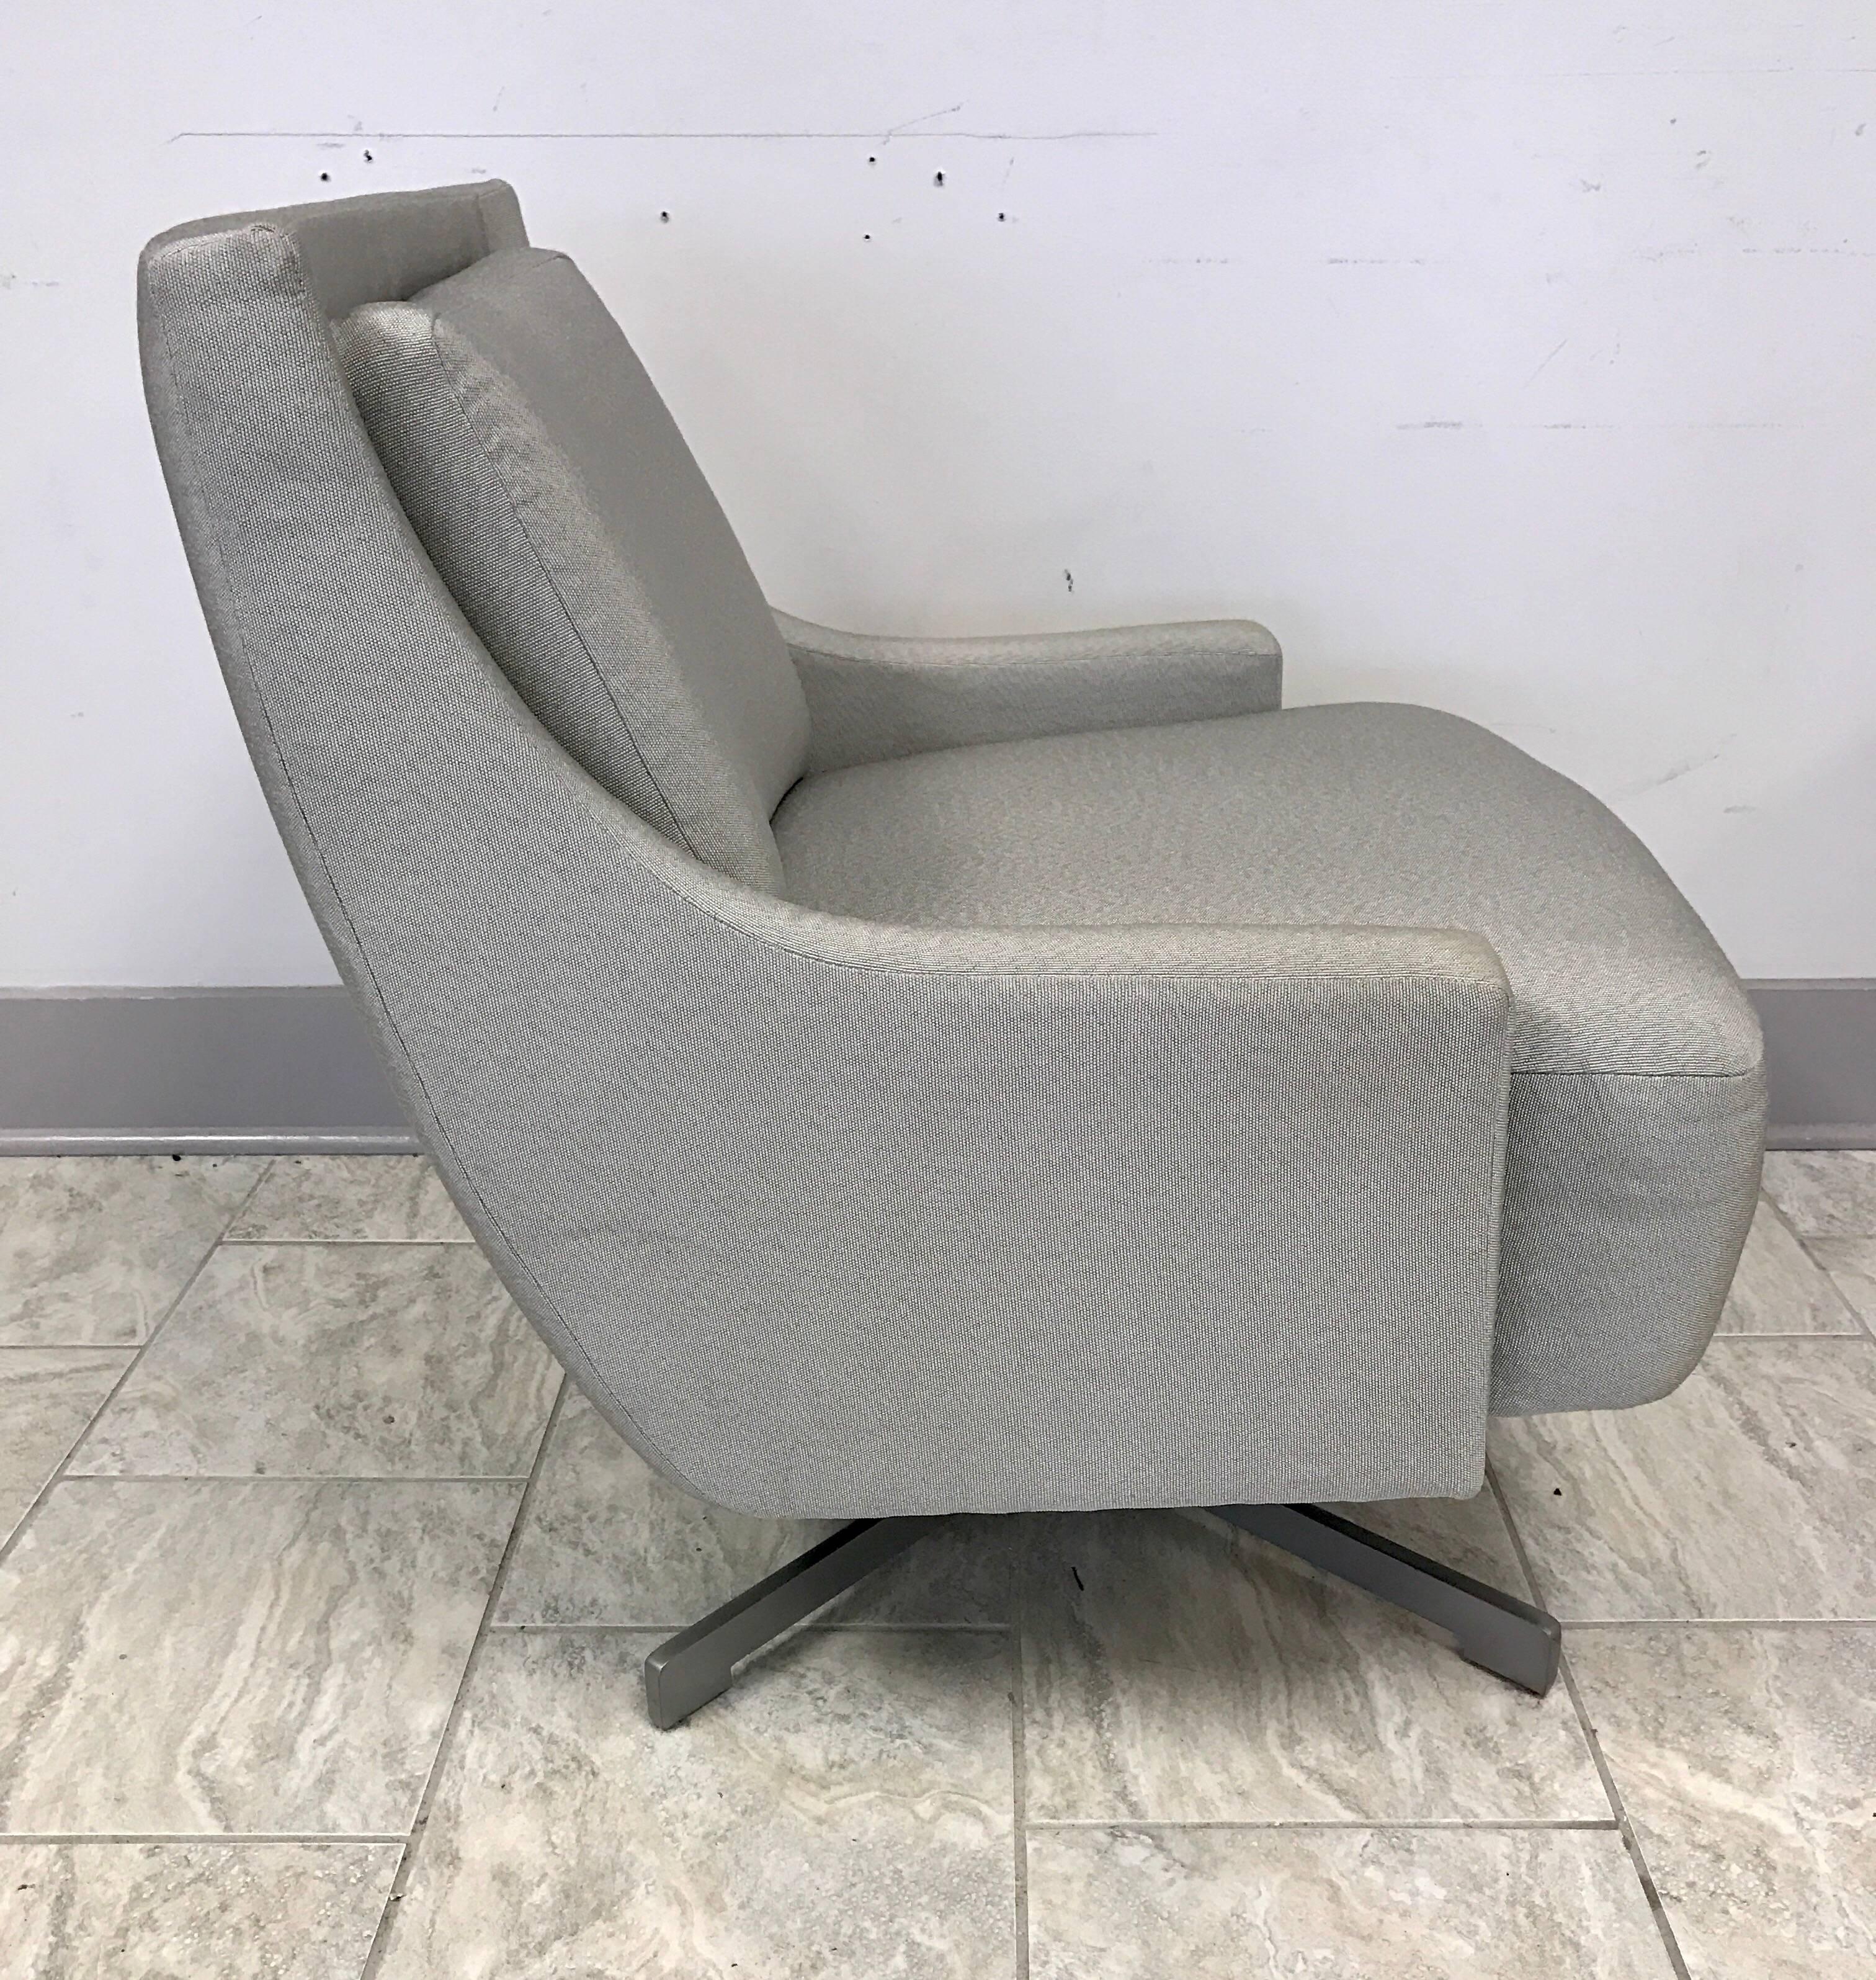 Sleek yet comfortable Barbara Barry designed HBF swivel chair on a four prong self-centre steel base done in a luxurious gray fabric.